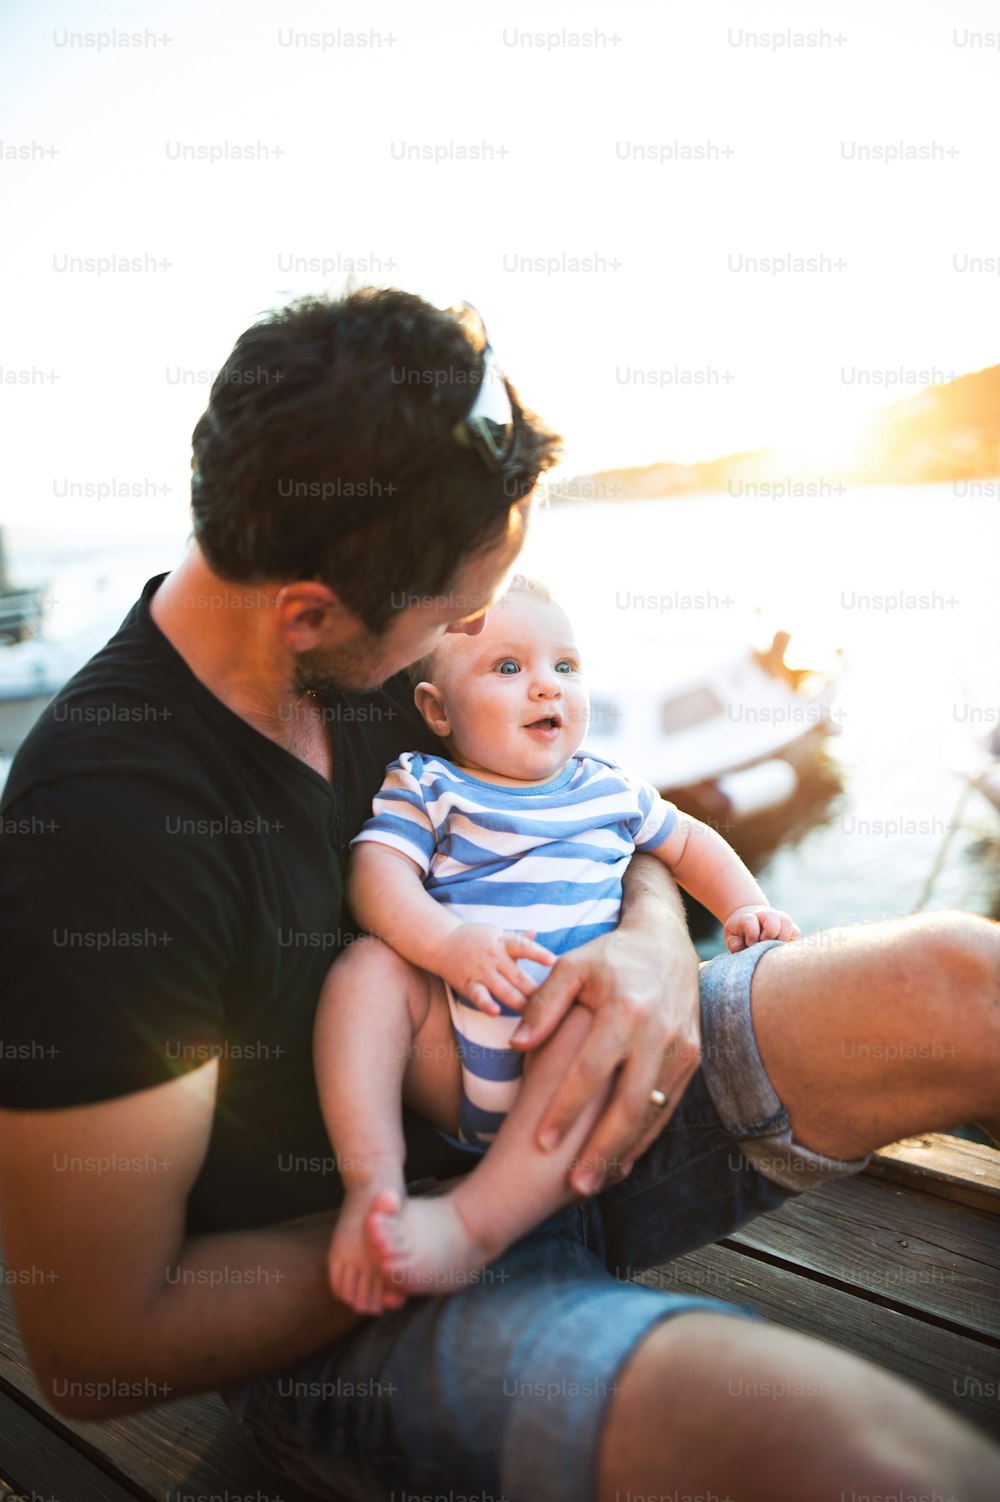 Handsome young man sitting on wooden pier holding his baby son in his arms enjoying their time at seaside.